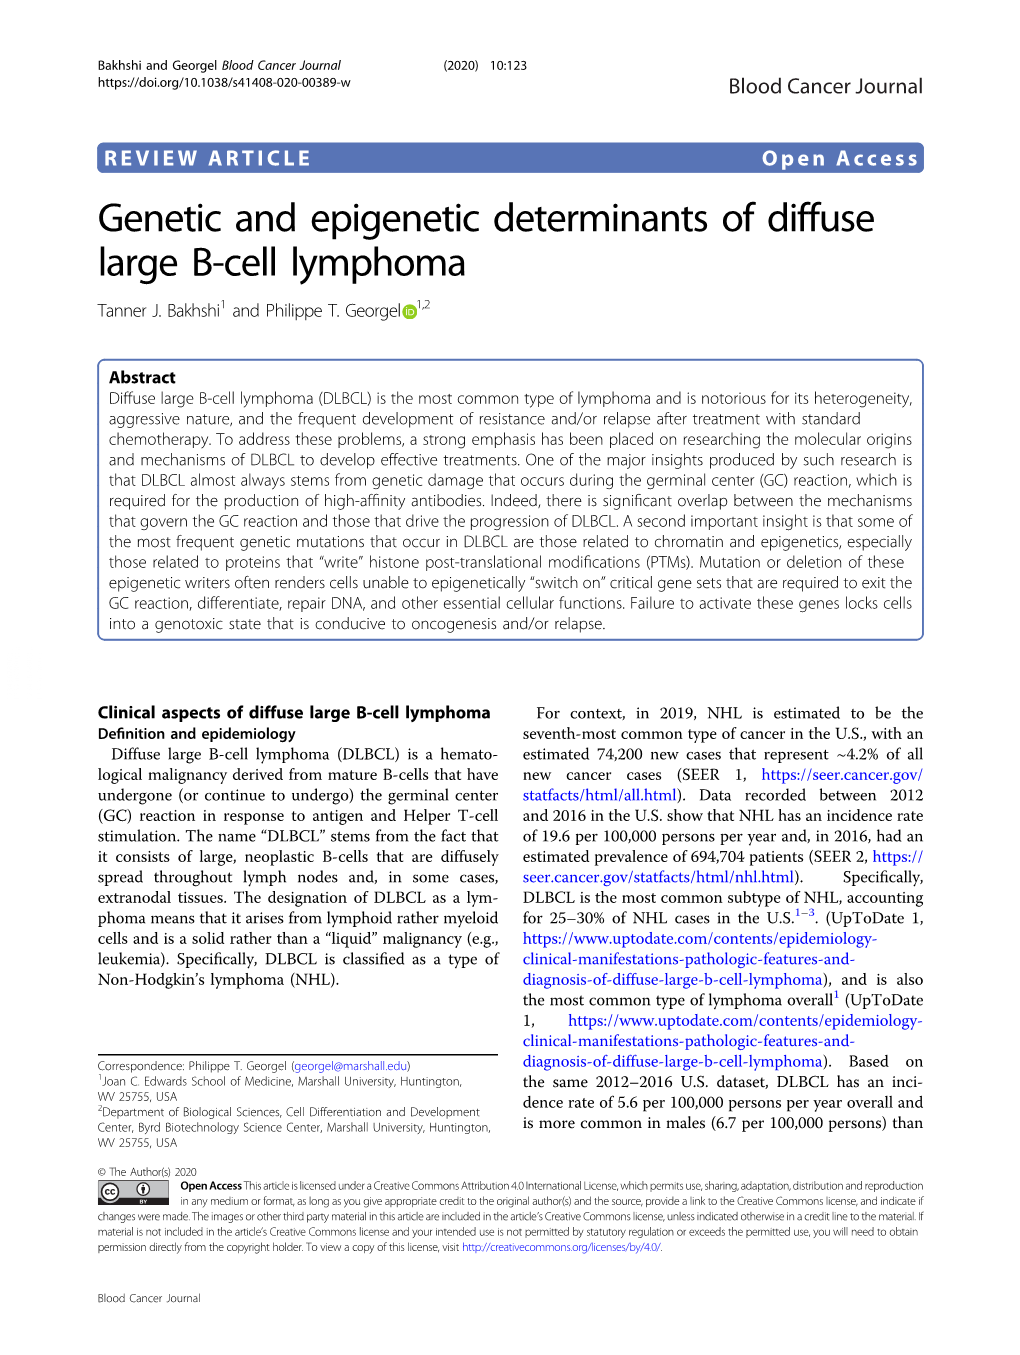 Genetic and Epigenetic Determinants of Diffuse Large B-Cell Lymphoma Tanner J